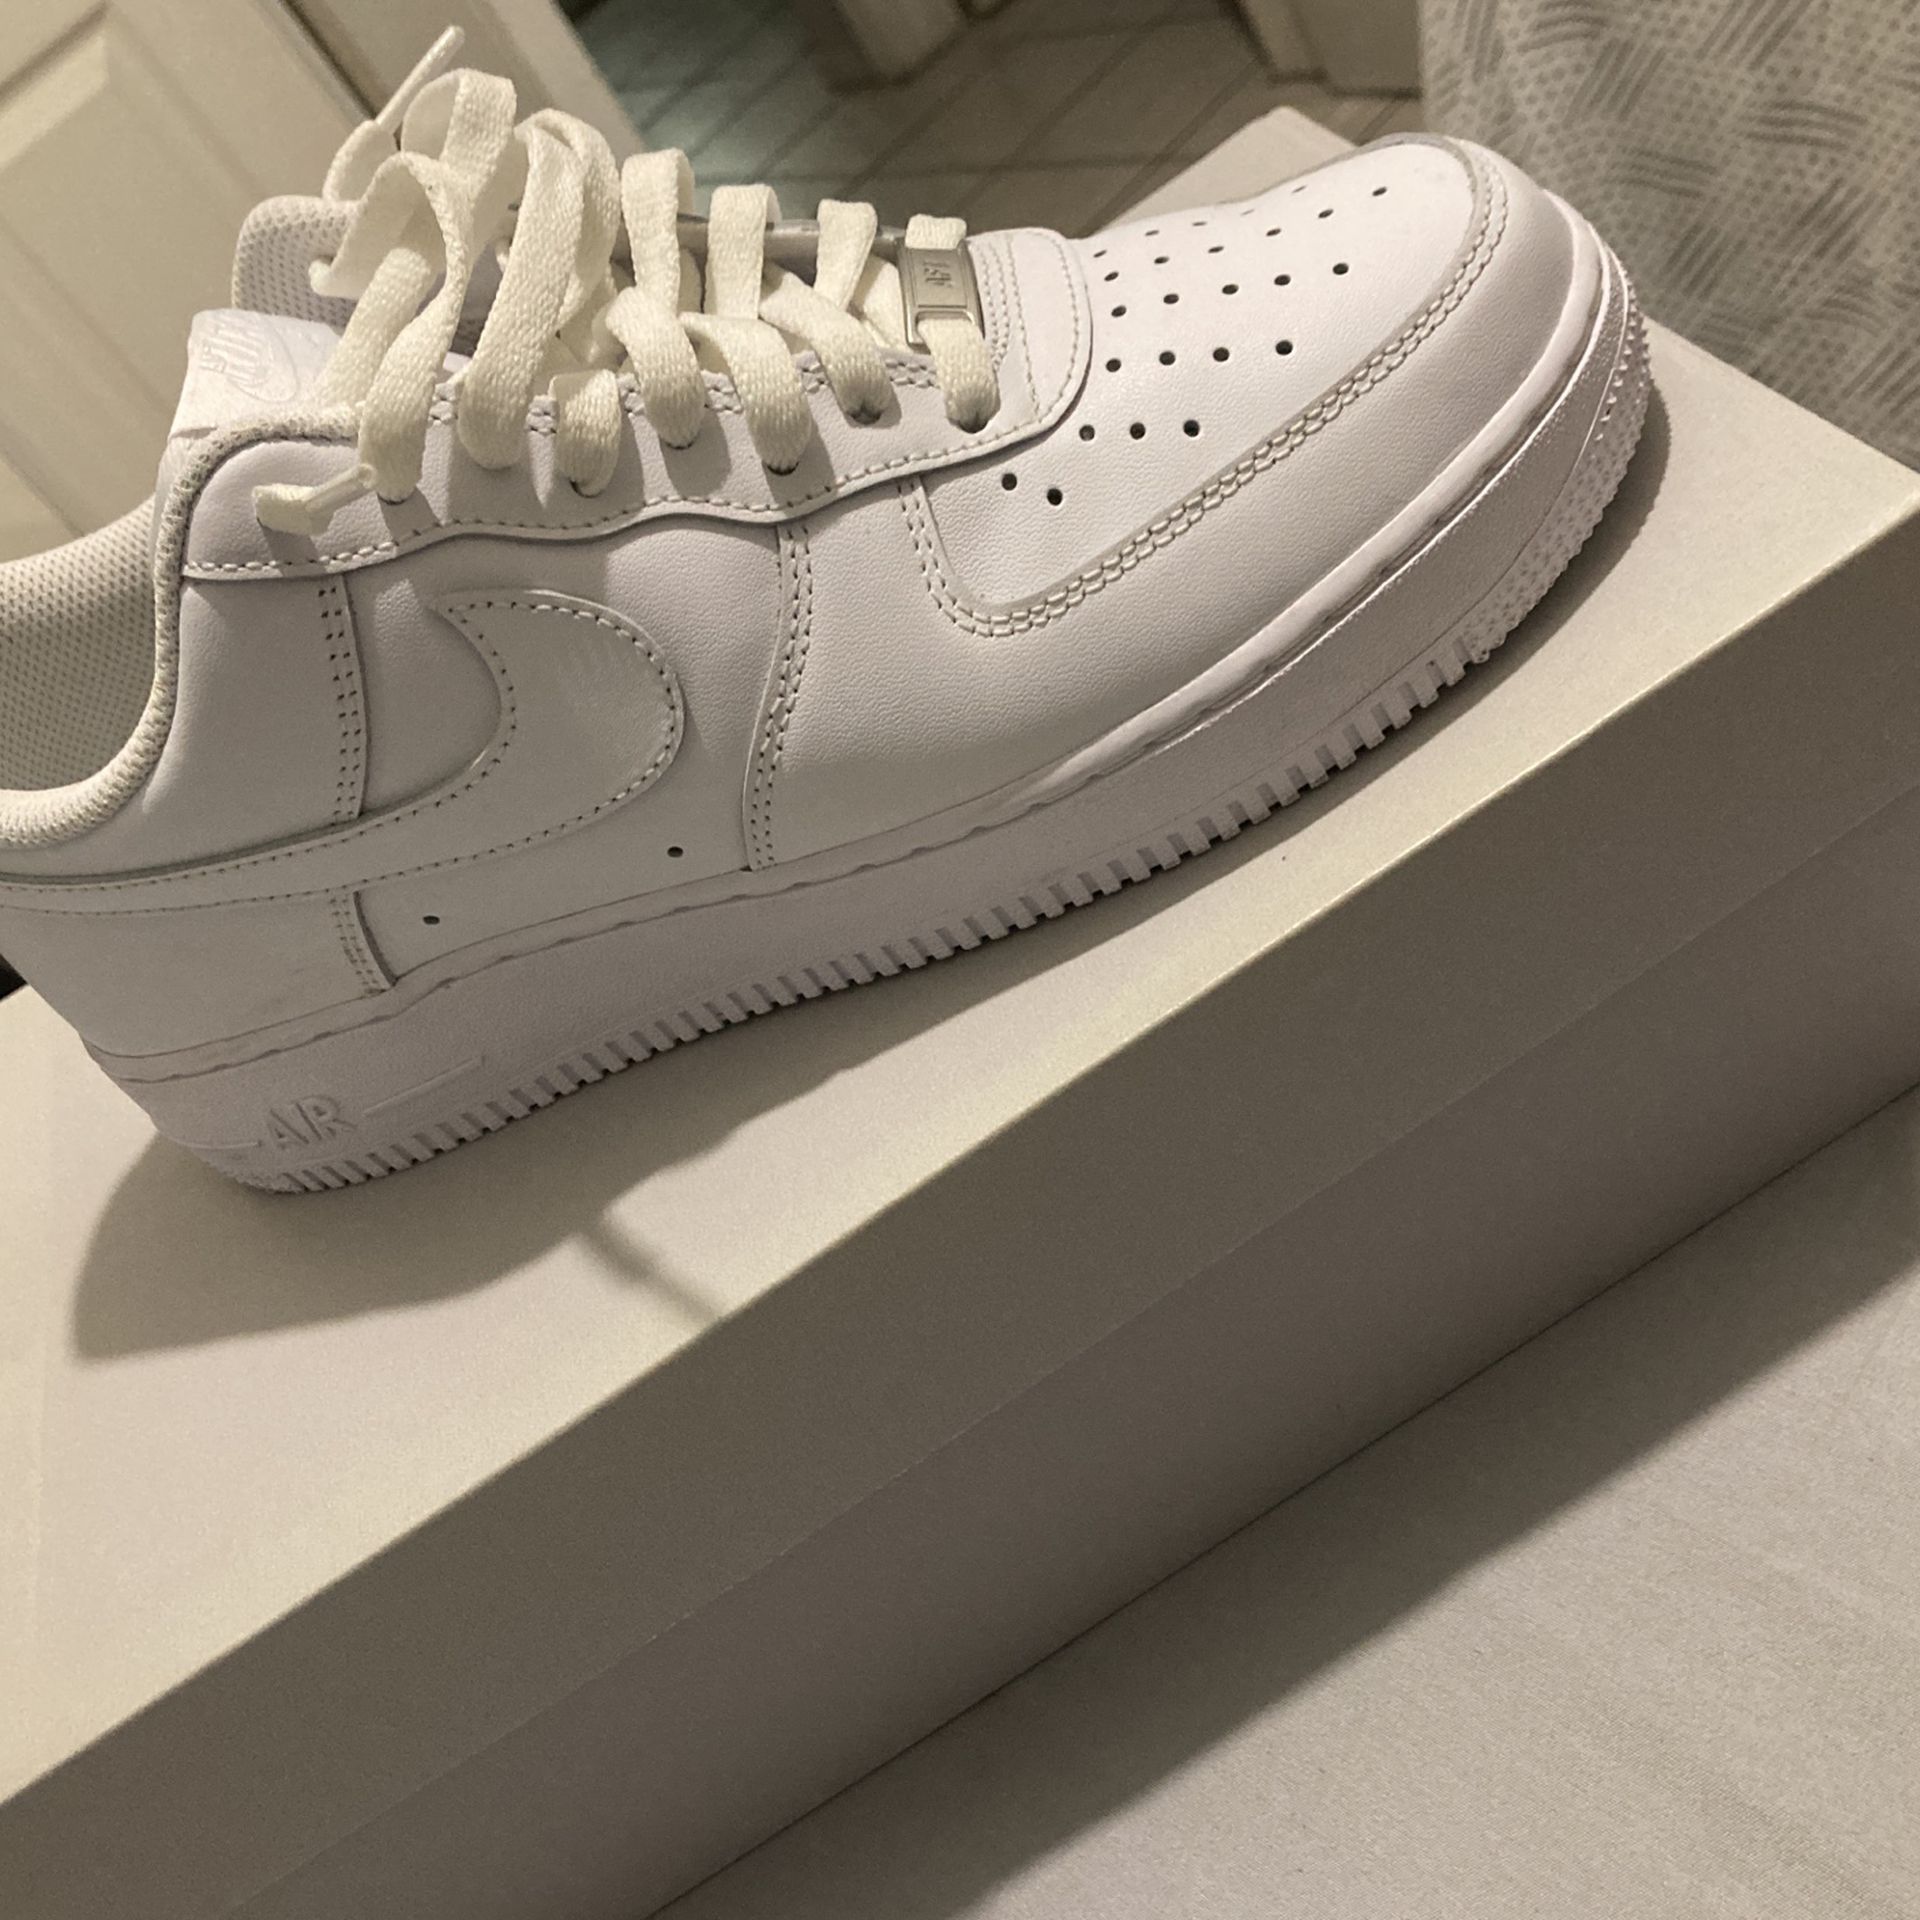 Air Force 1 Size 8 for Sale in San Antonio, TX - OfferUp